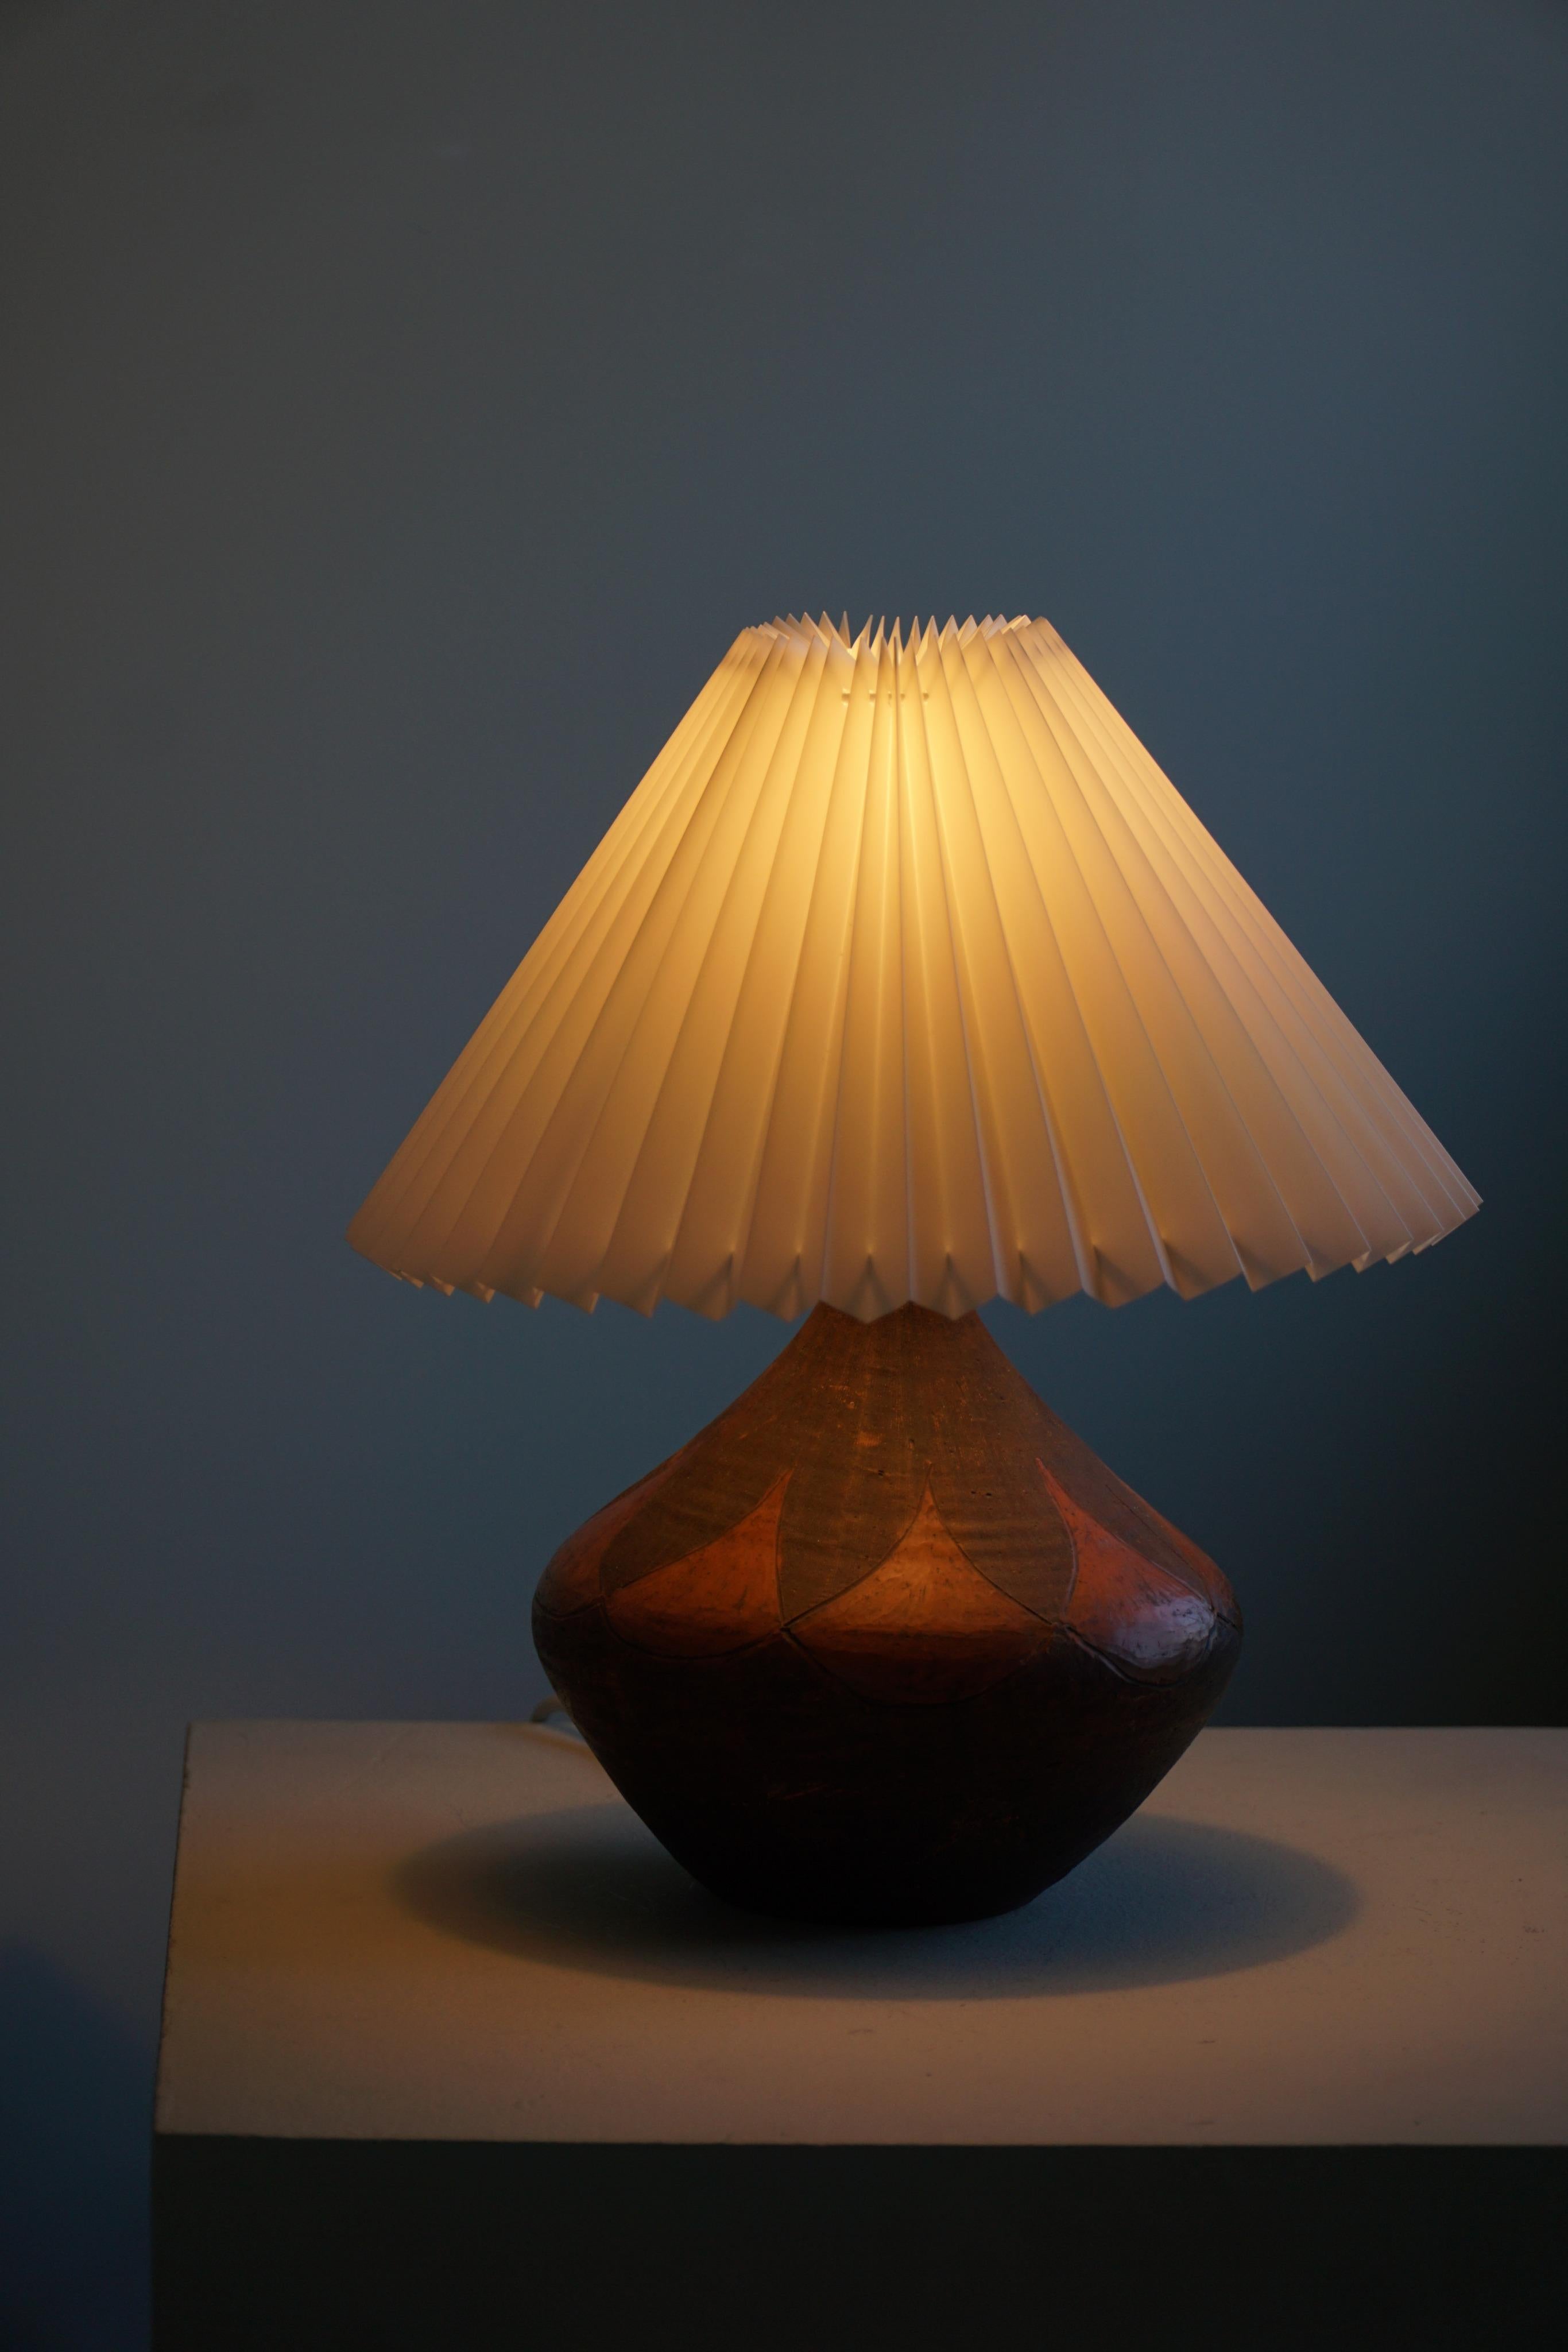 Danish Midcentury Round Ceramic Table Lamp, Earthen Colors, 1950s For Sale 1